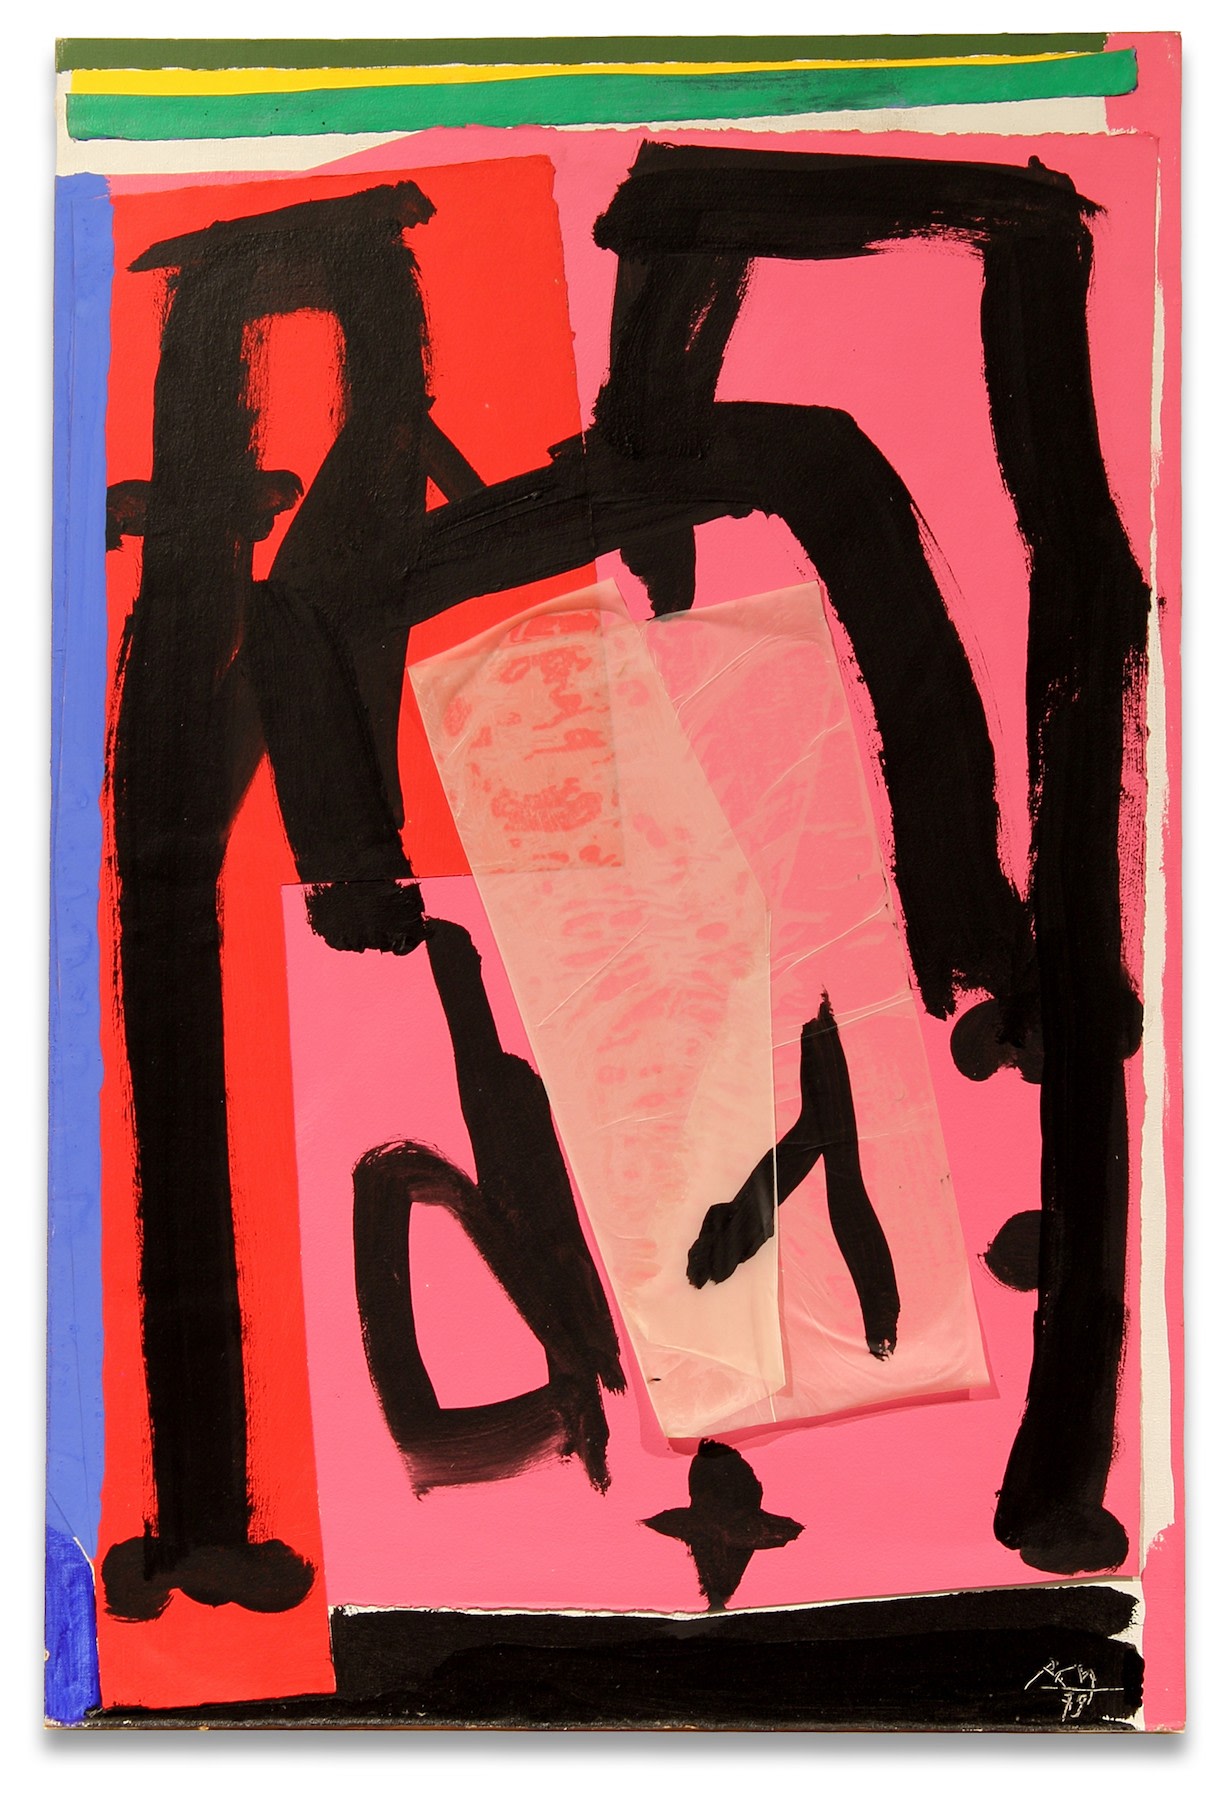 Robert Motherwell,&nbsp;Mexican Collage, 1979,&nbsp;Acrylic and pasted papers on canvas mounted on board,&nbsp;35 x 23 inches,&nbsp;88.9 x 58.4 cm,&nbsp;MMG#30415, &nbsp;